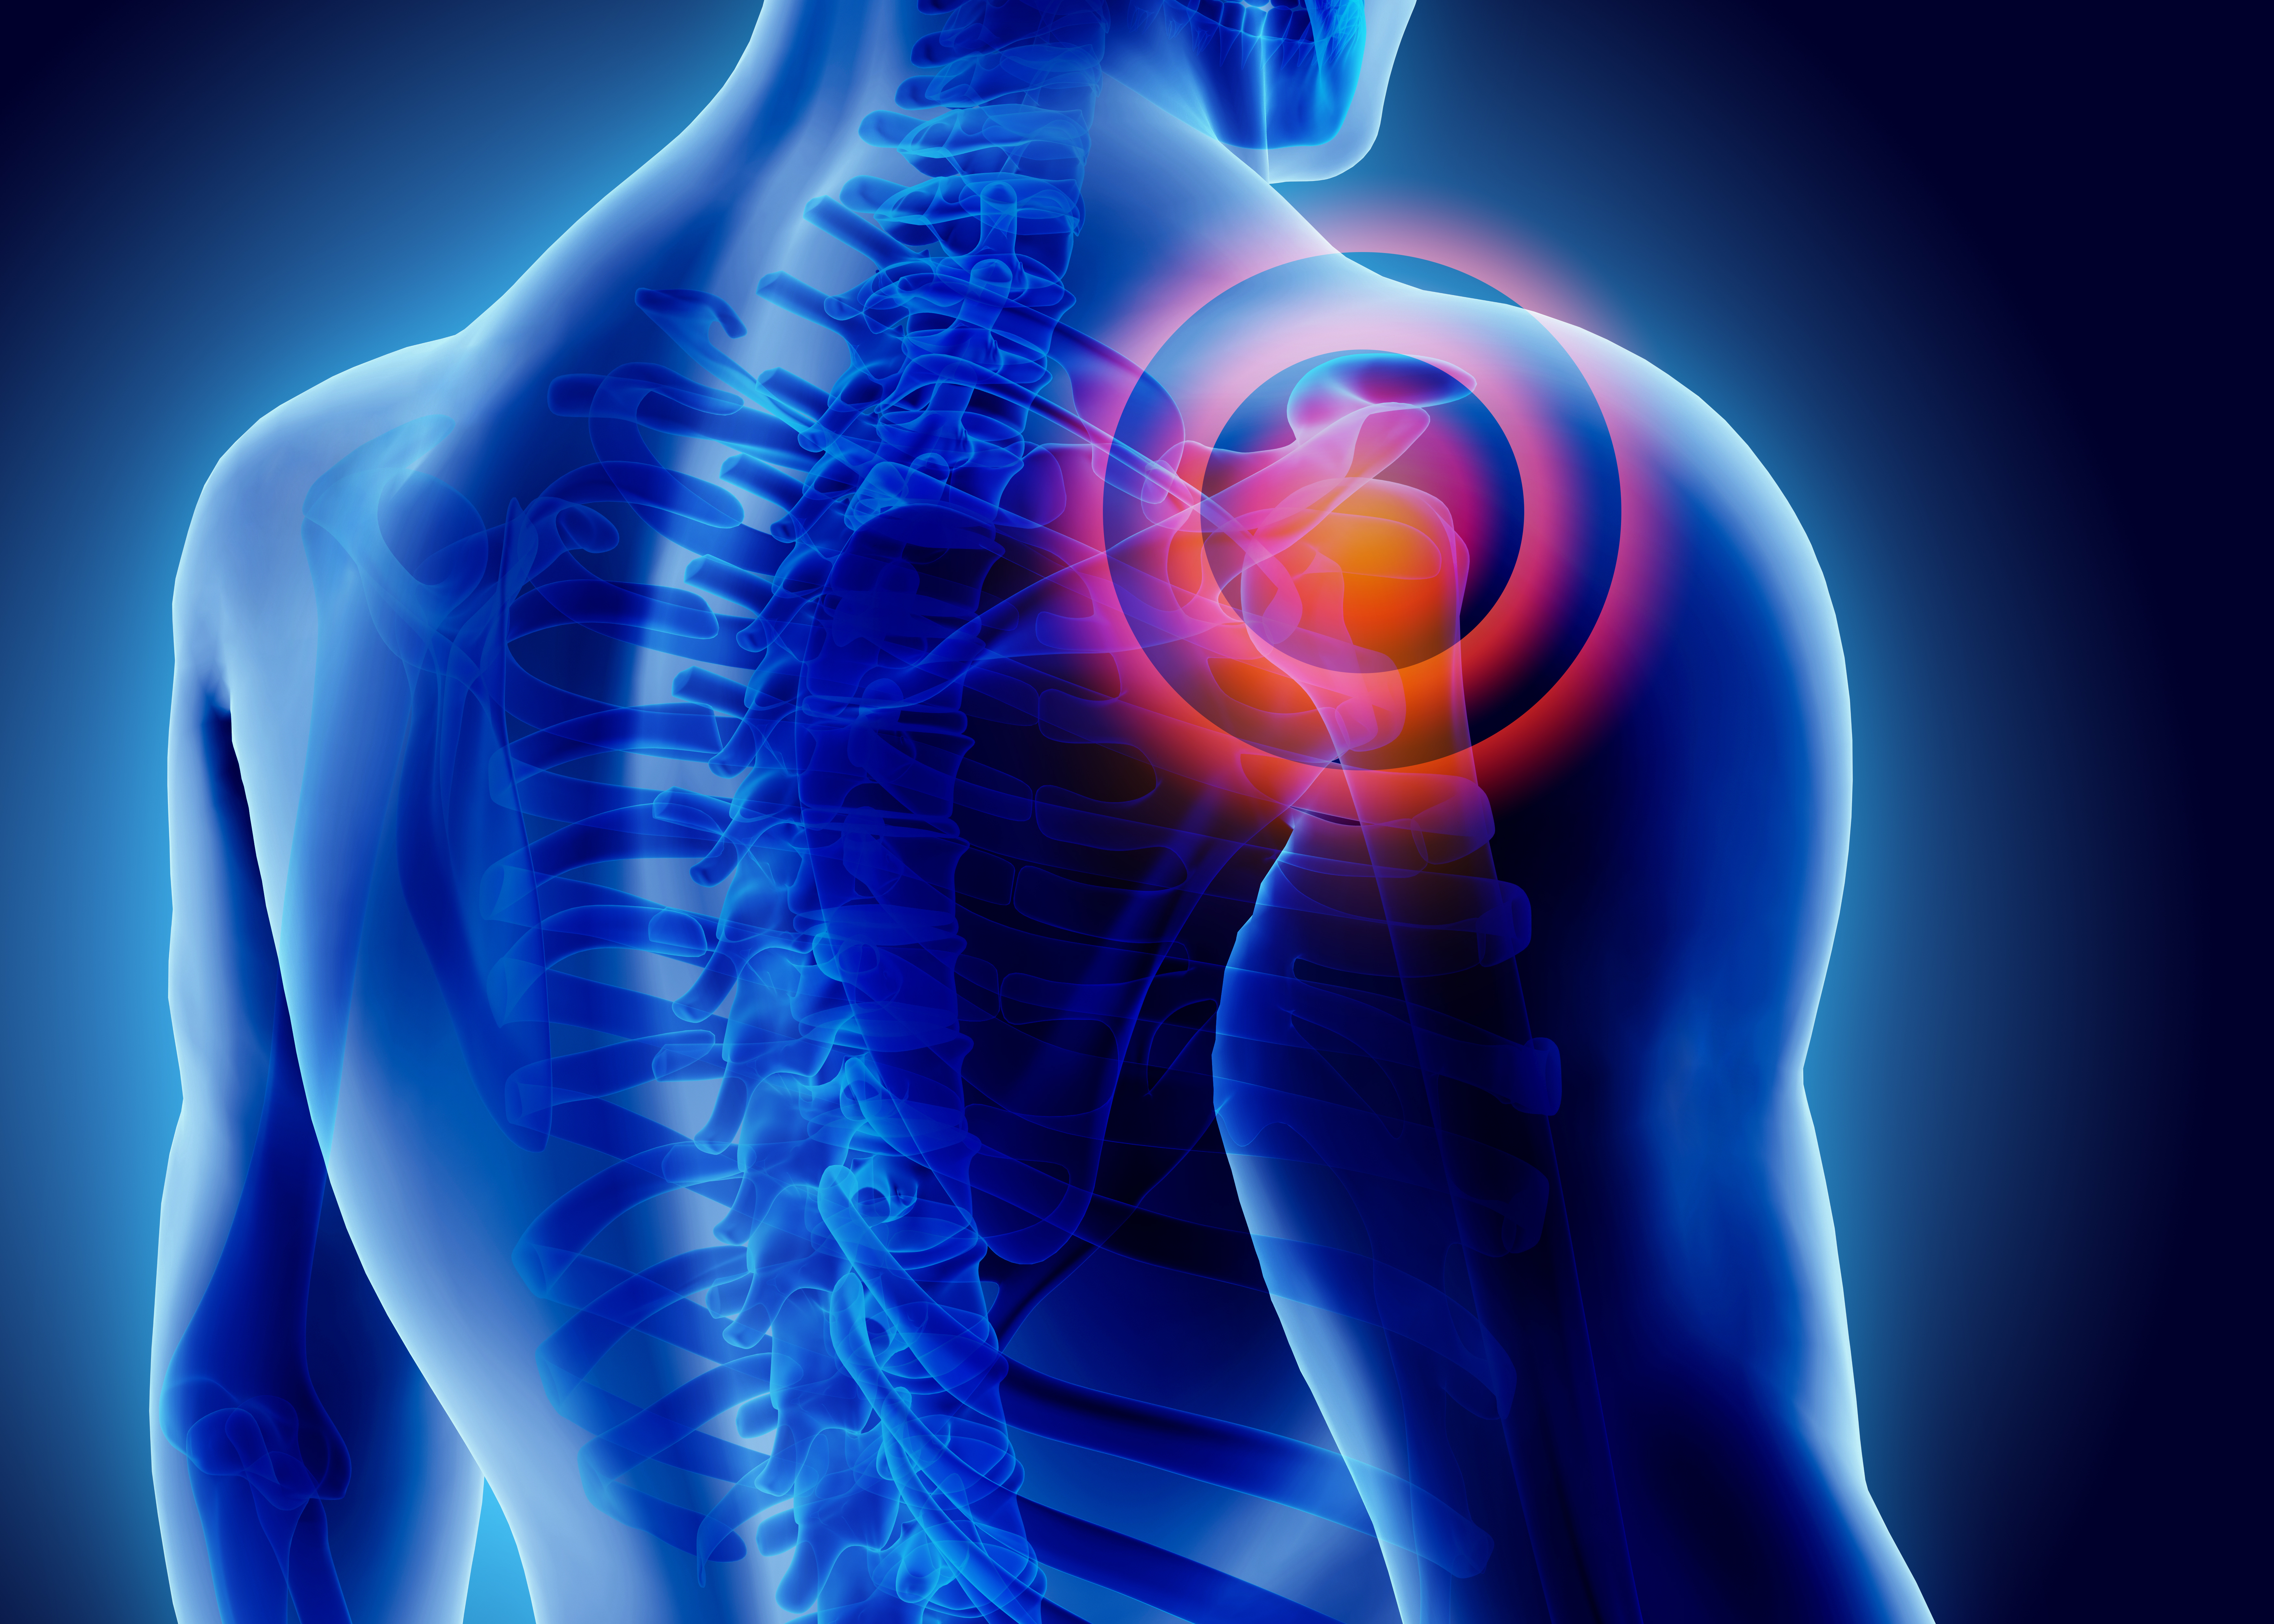  Does common NHS shoulder surgery work?